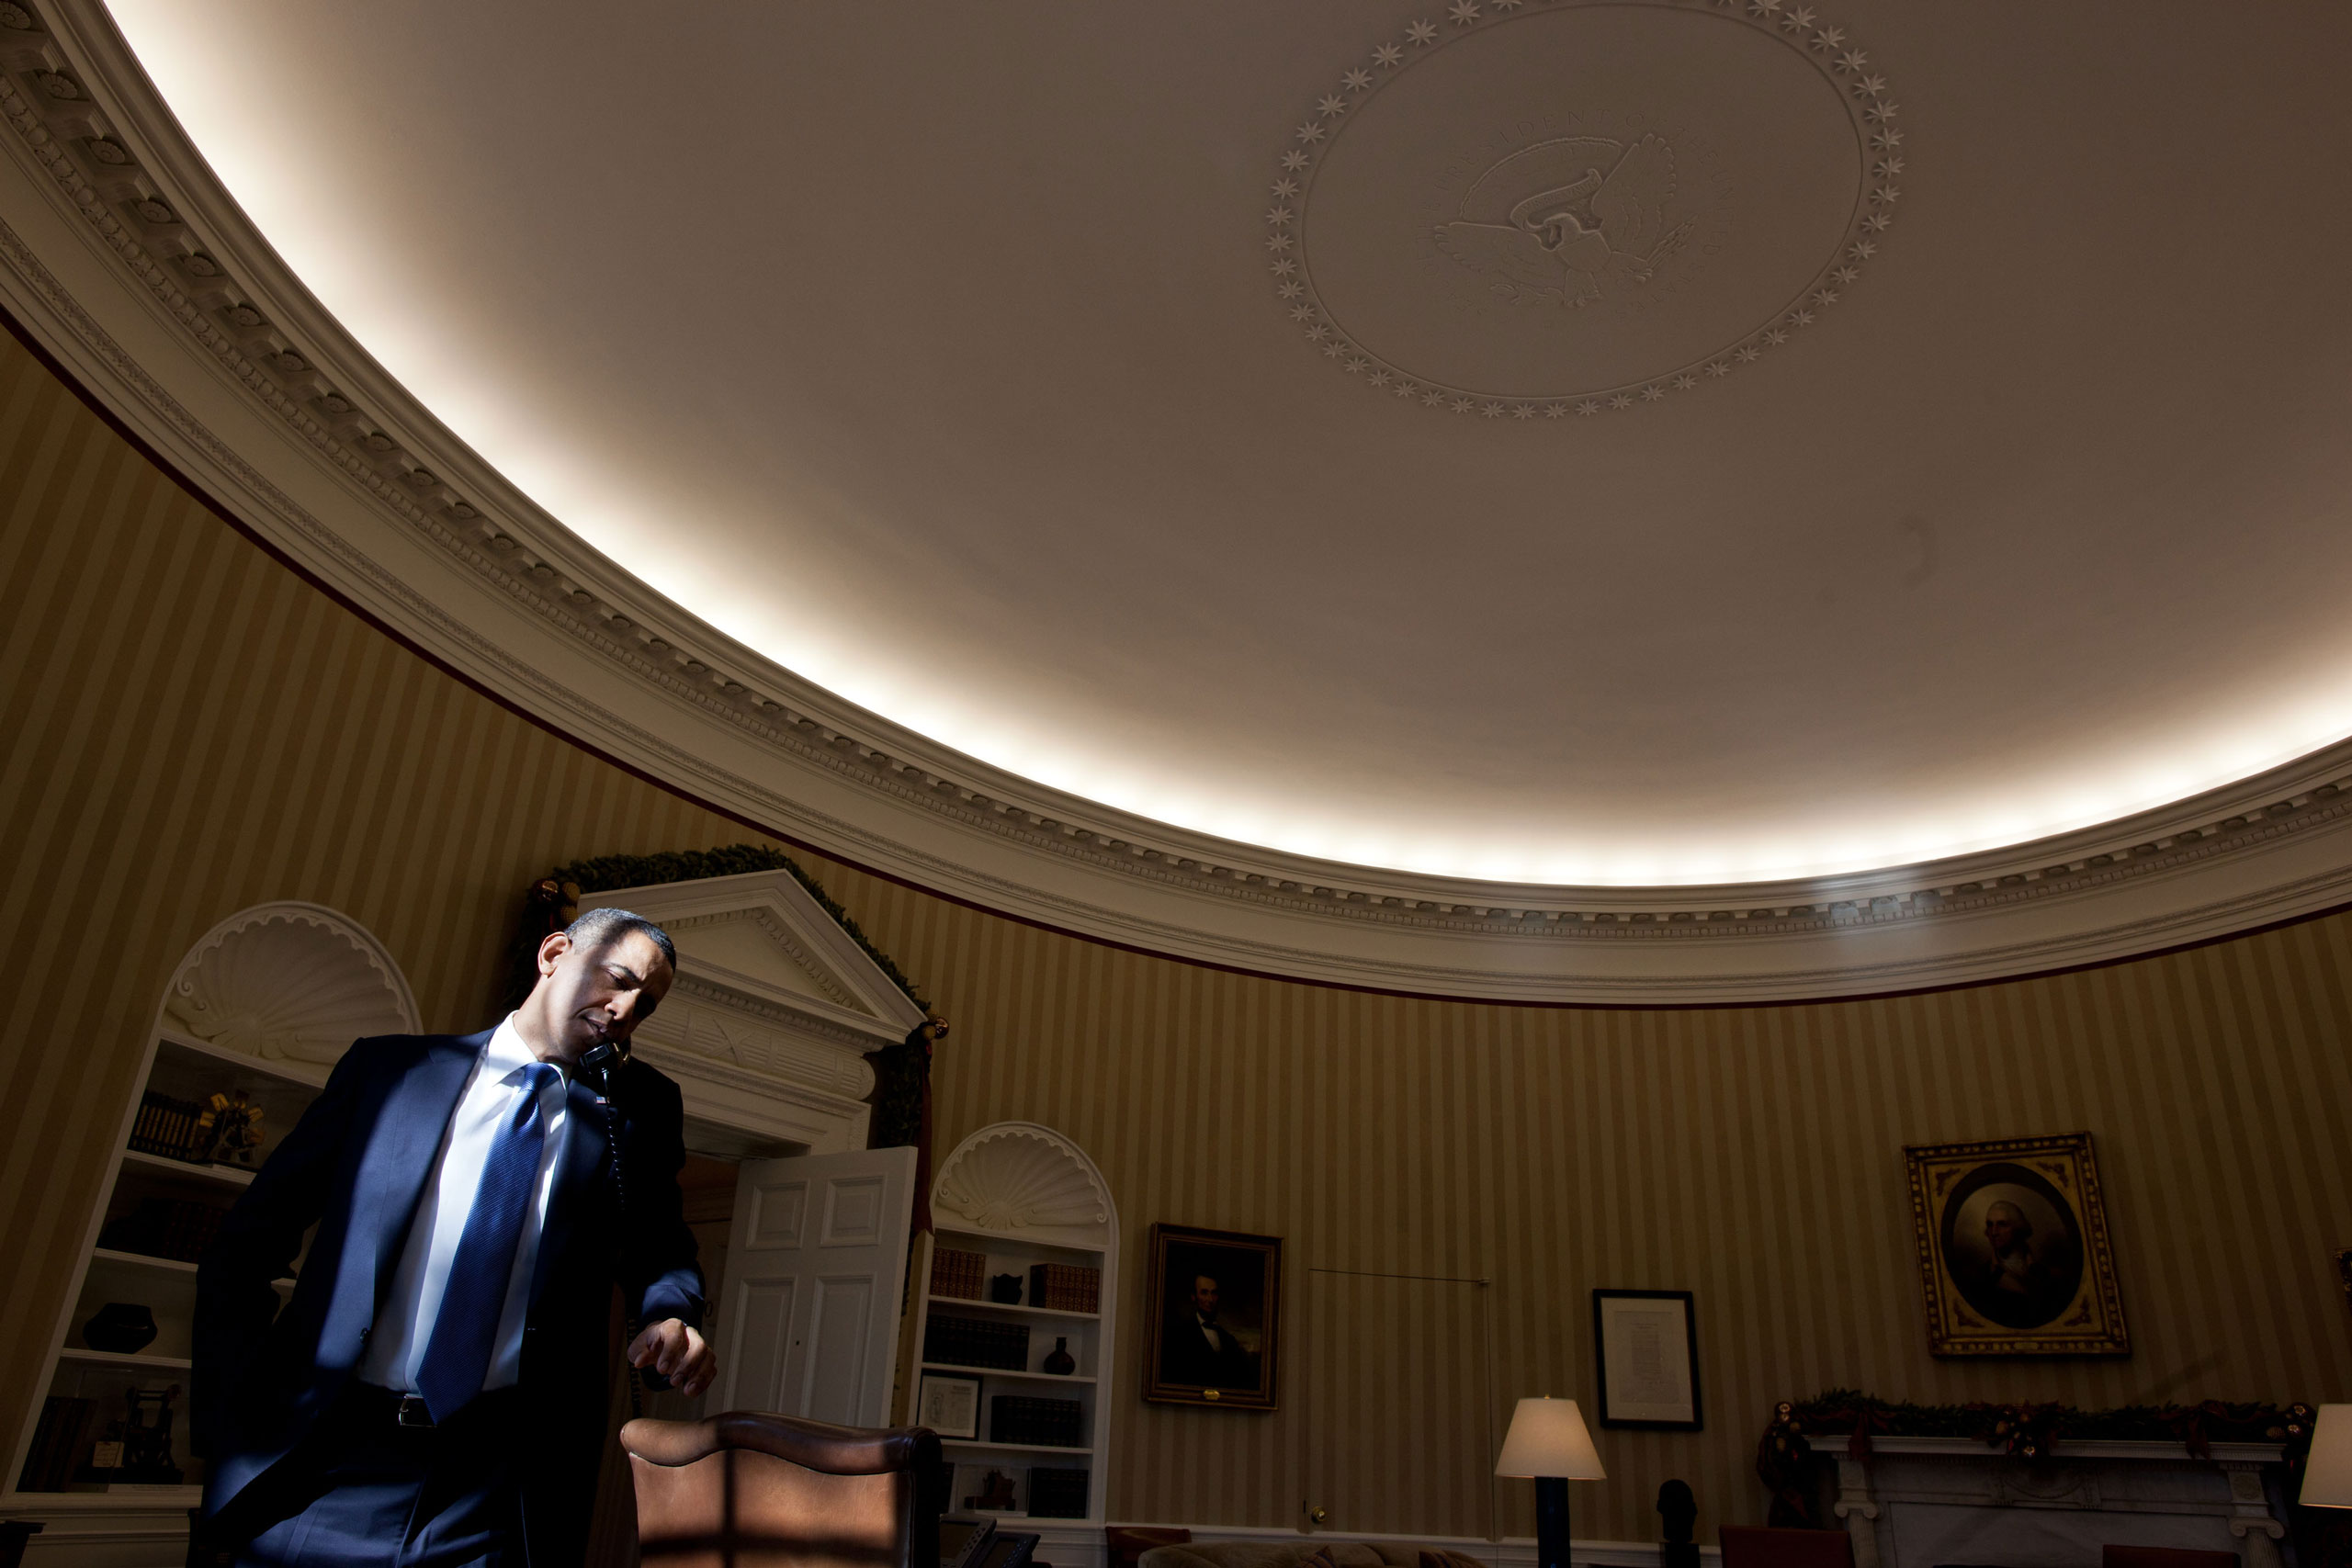 A splash of sunlight falls on the President's face as he makes a phone call in the Oval Office, Dec. 19, 2011.